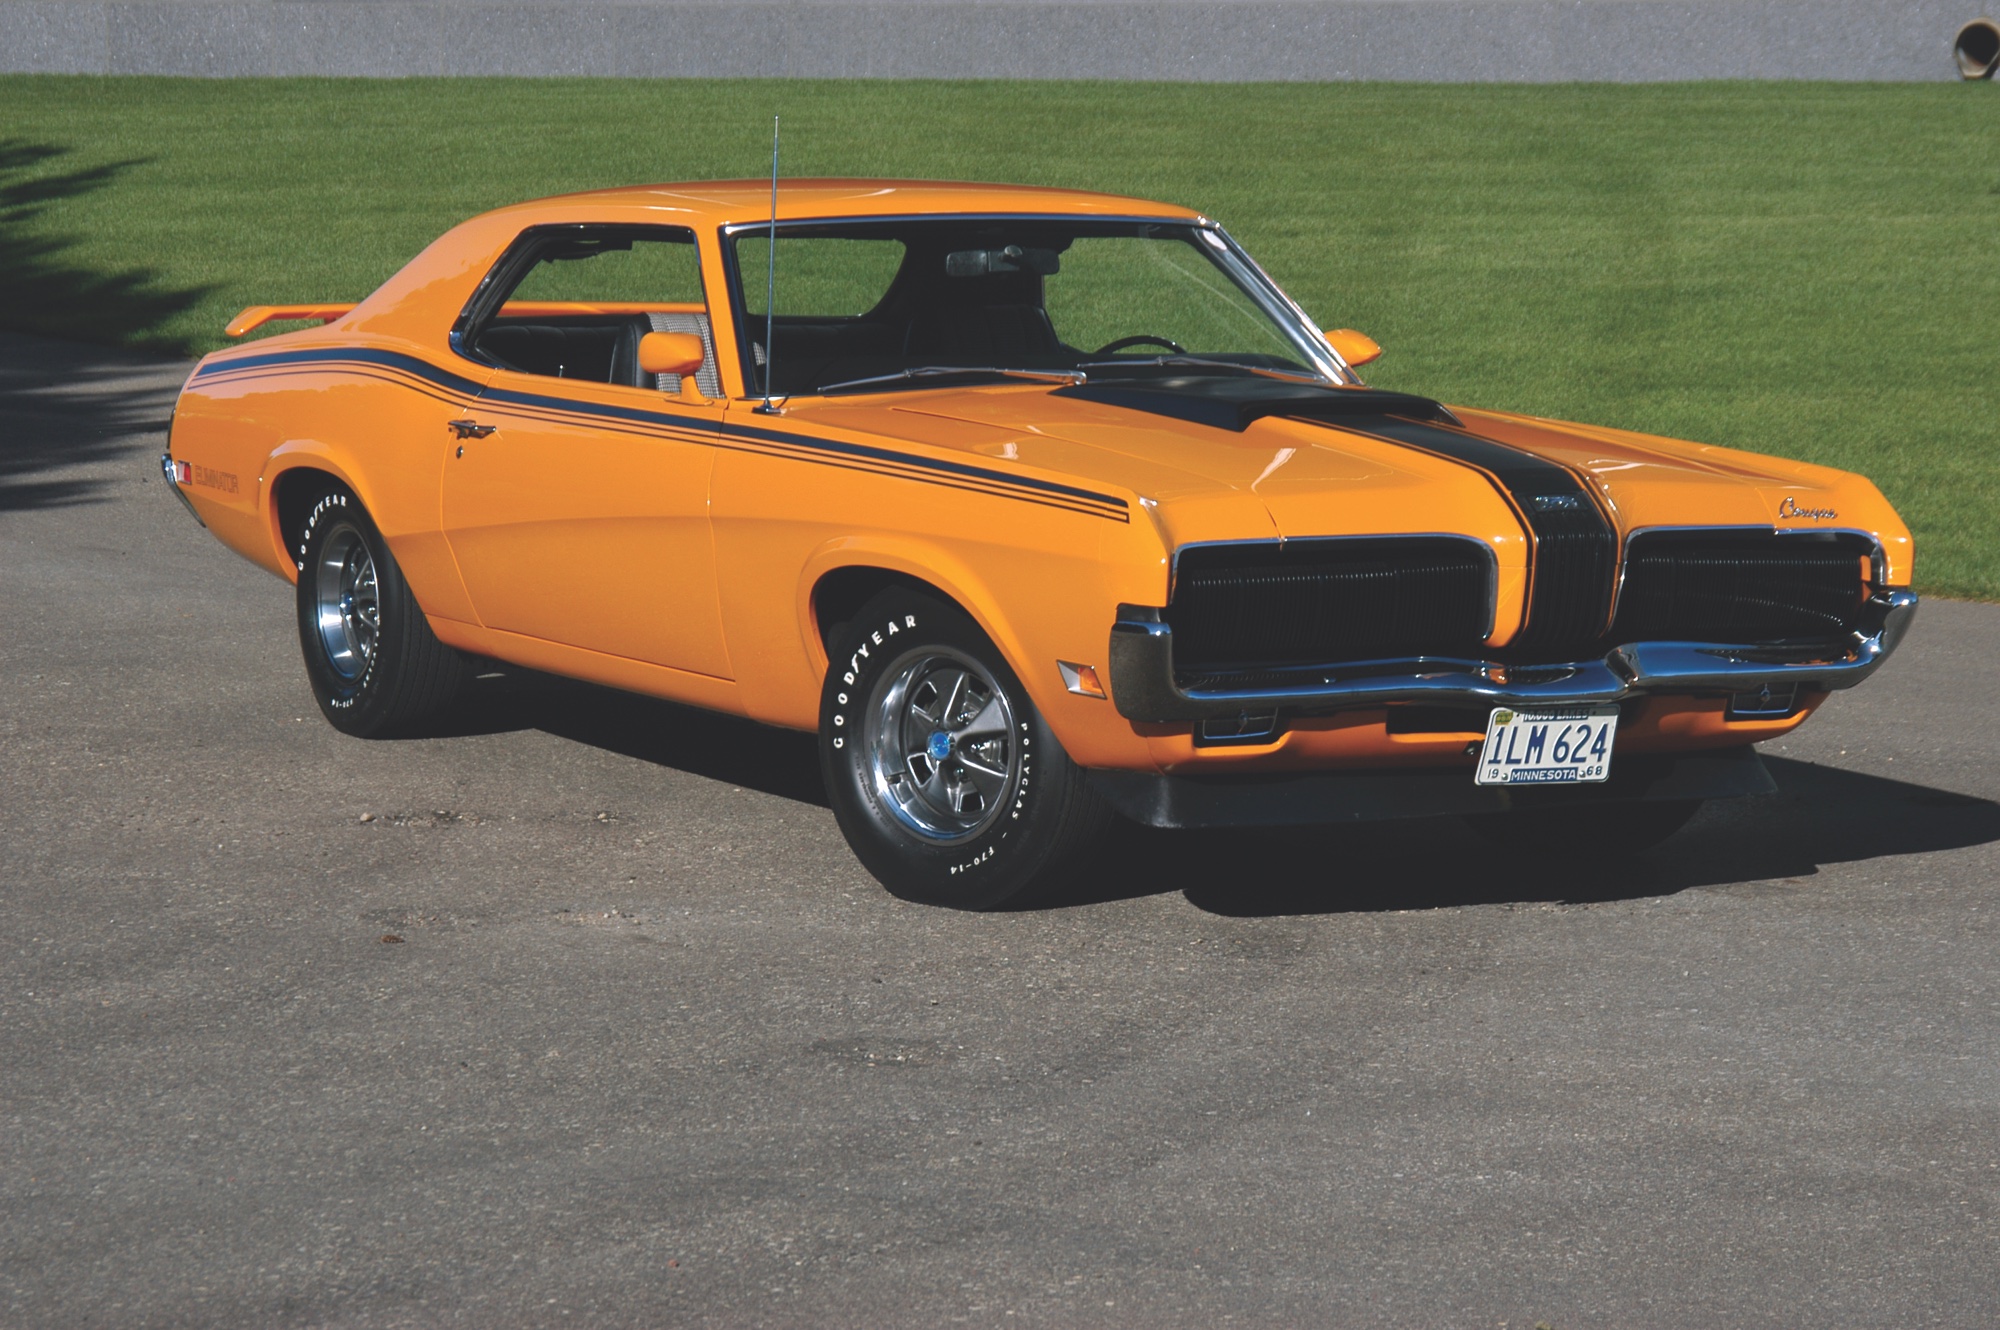 1975 Ford Ranchero wallpapers, Vehicles, HQ 1975 Ford Ranchero pictures ...